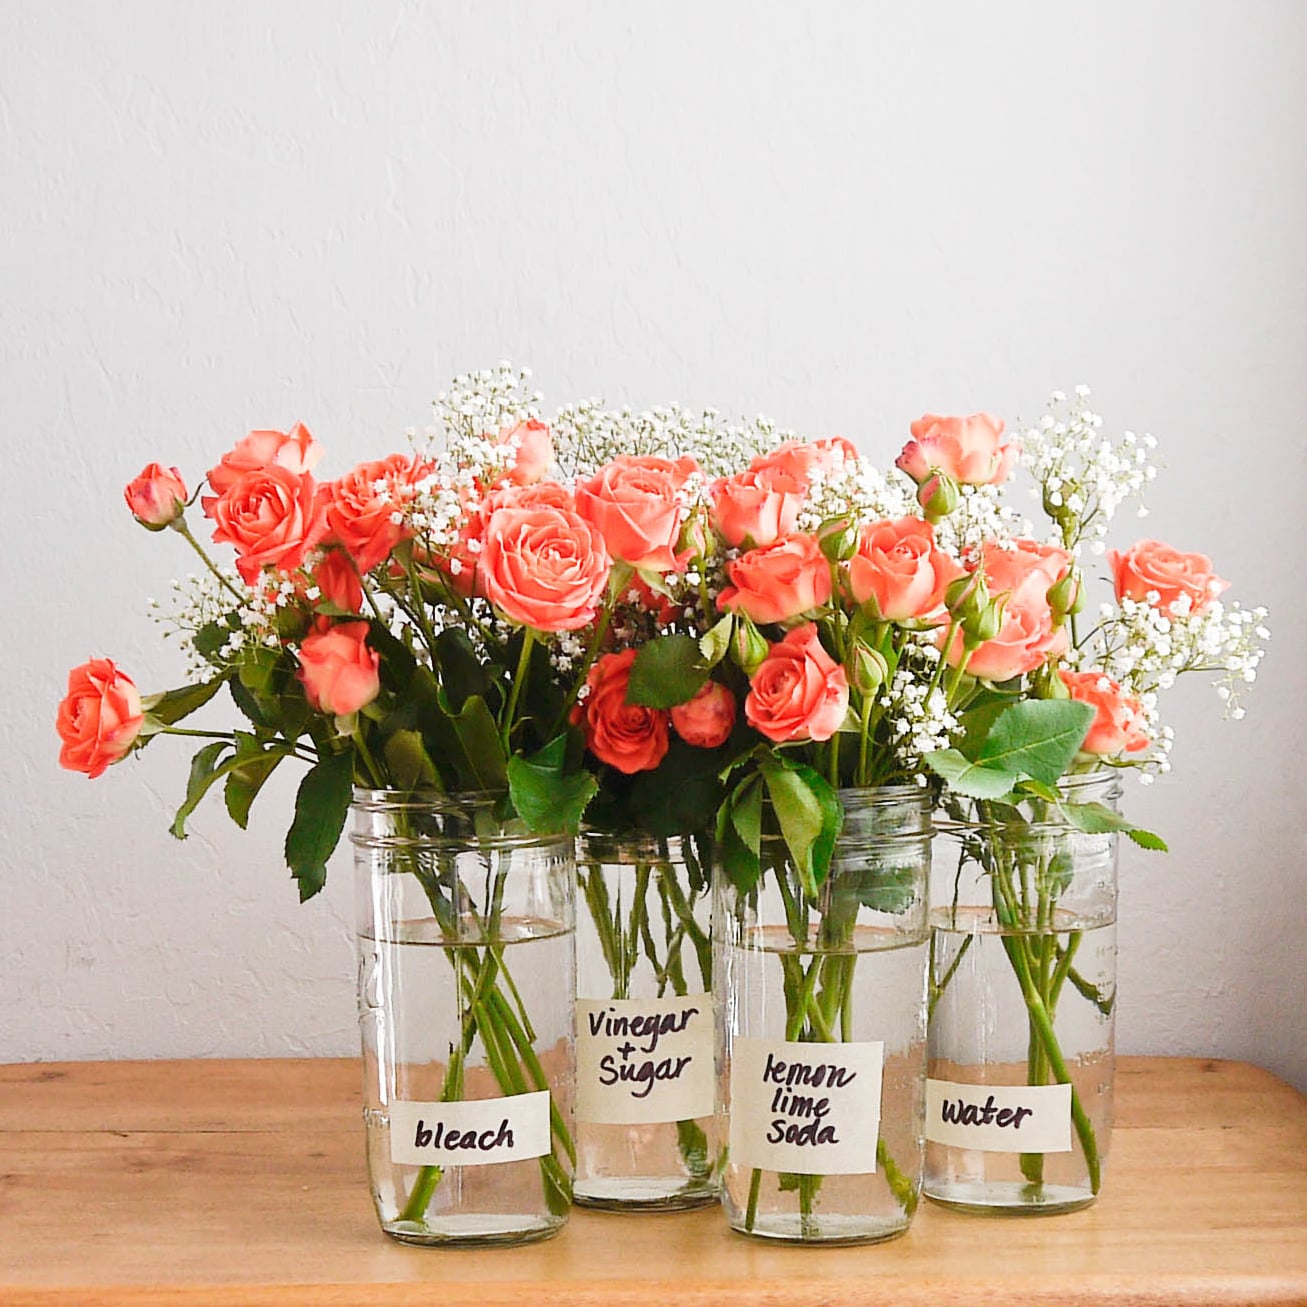 How to Keep Fresh Cut Flowers Alive Longer